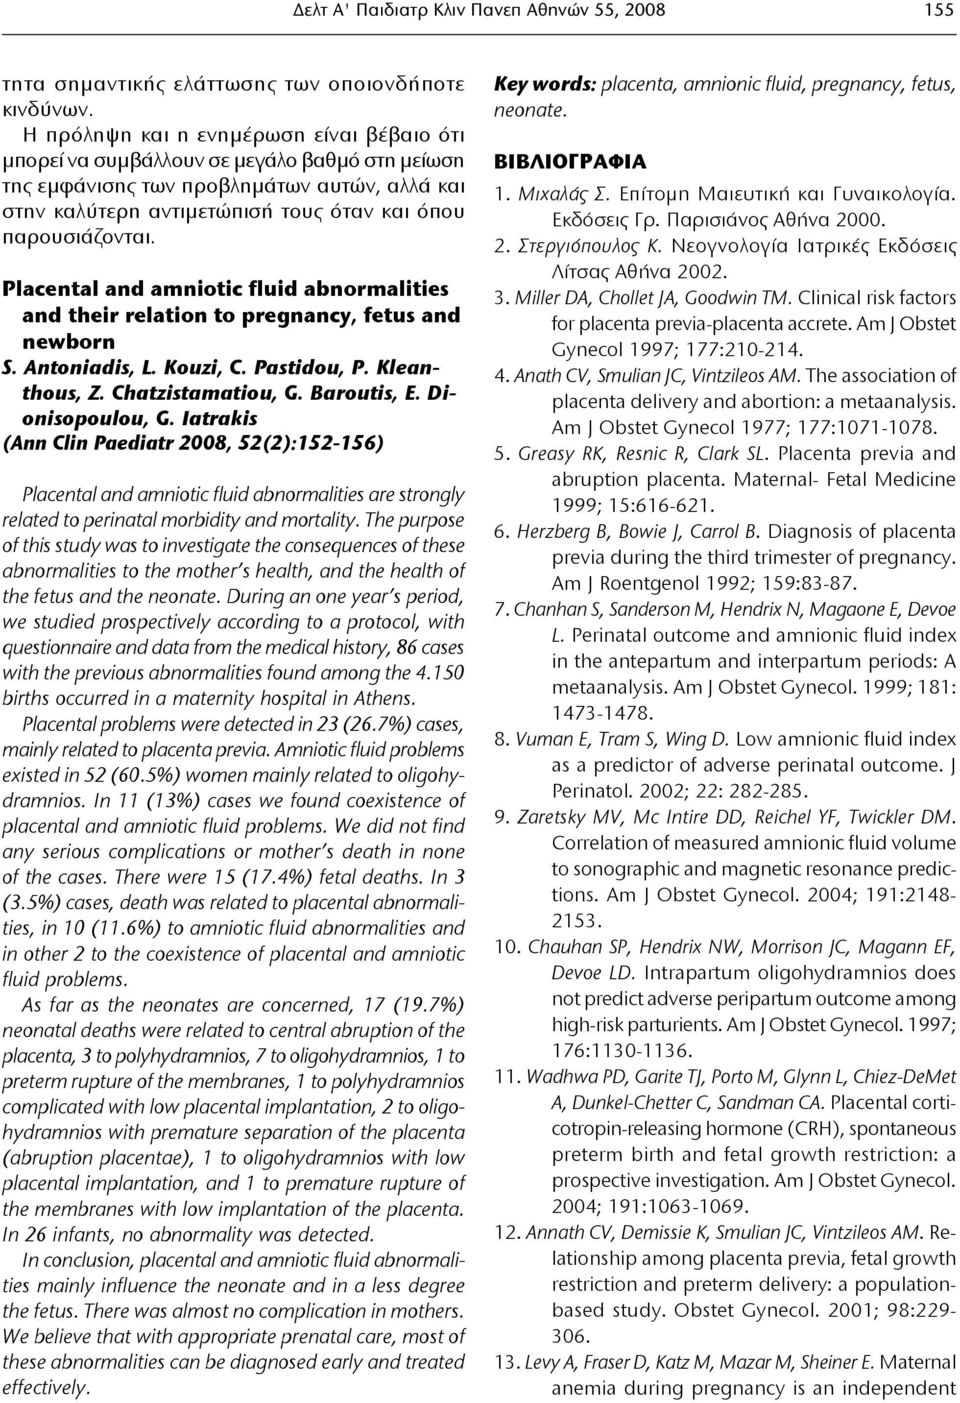 Placental and amniotic fluid abnormalities and their relation to pregnancy, fetus and newborn S. Antoniadis, L. Kouzi, C. Pastidou, P. Kleanthous, Z. Chatzistamatiou, G. Baroutis, E. Dionisopoulou, G.